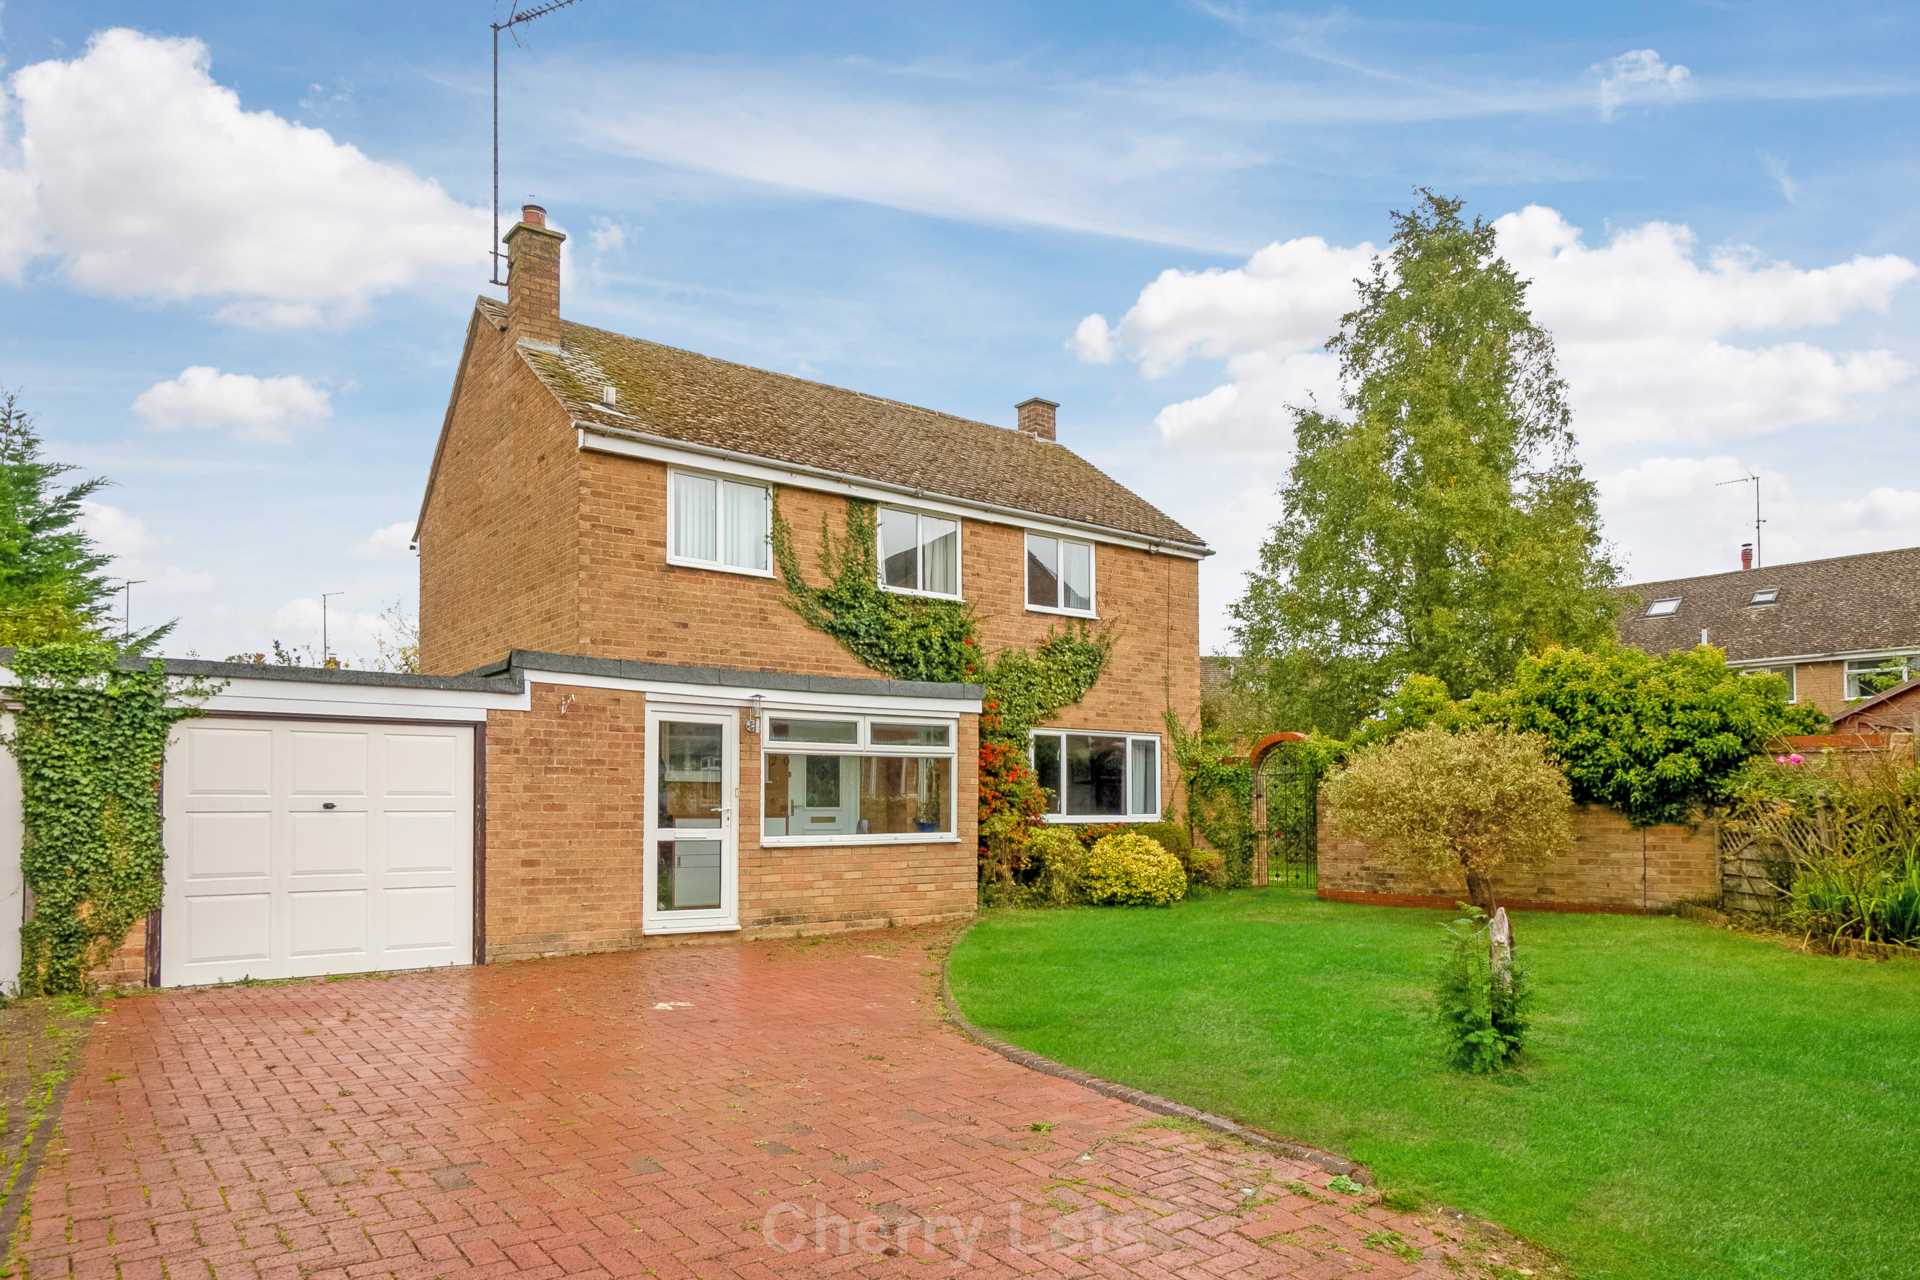 4 bed detached house to rent  - Property Image 1